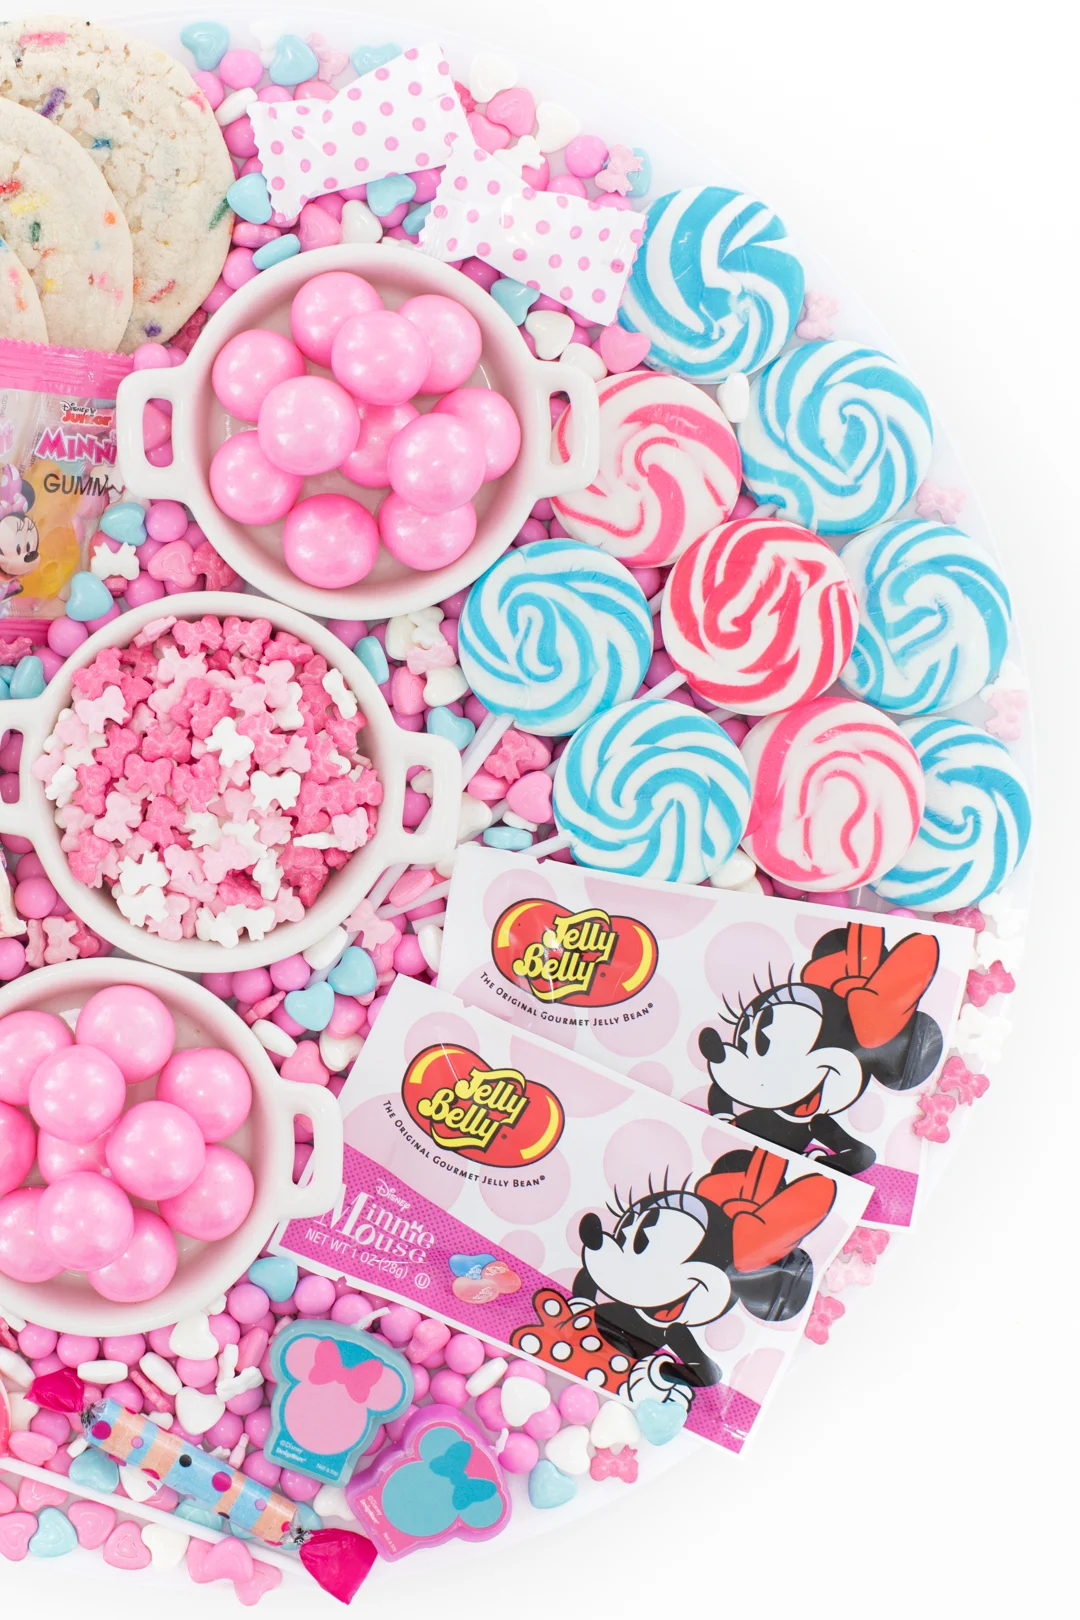 spread of pretty minnie mouse inspired candies for parties